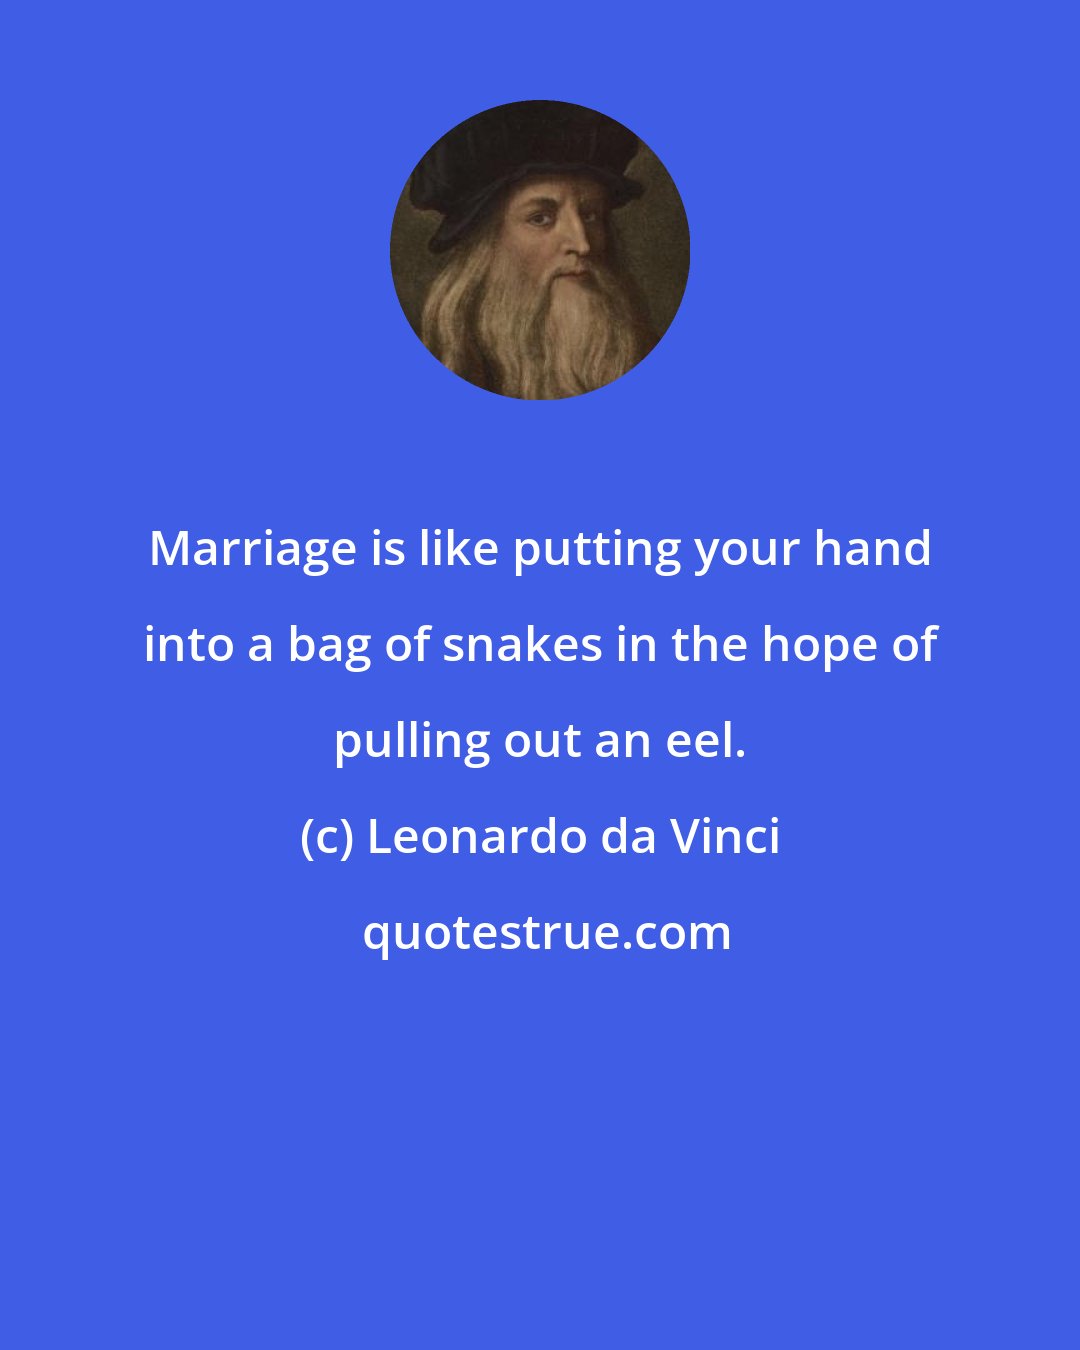 Leonardo da Vinci: Marriage is like putting your hand into a bag of snakes in the hope of pulling out an eel.